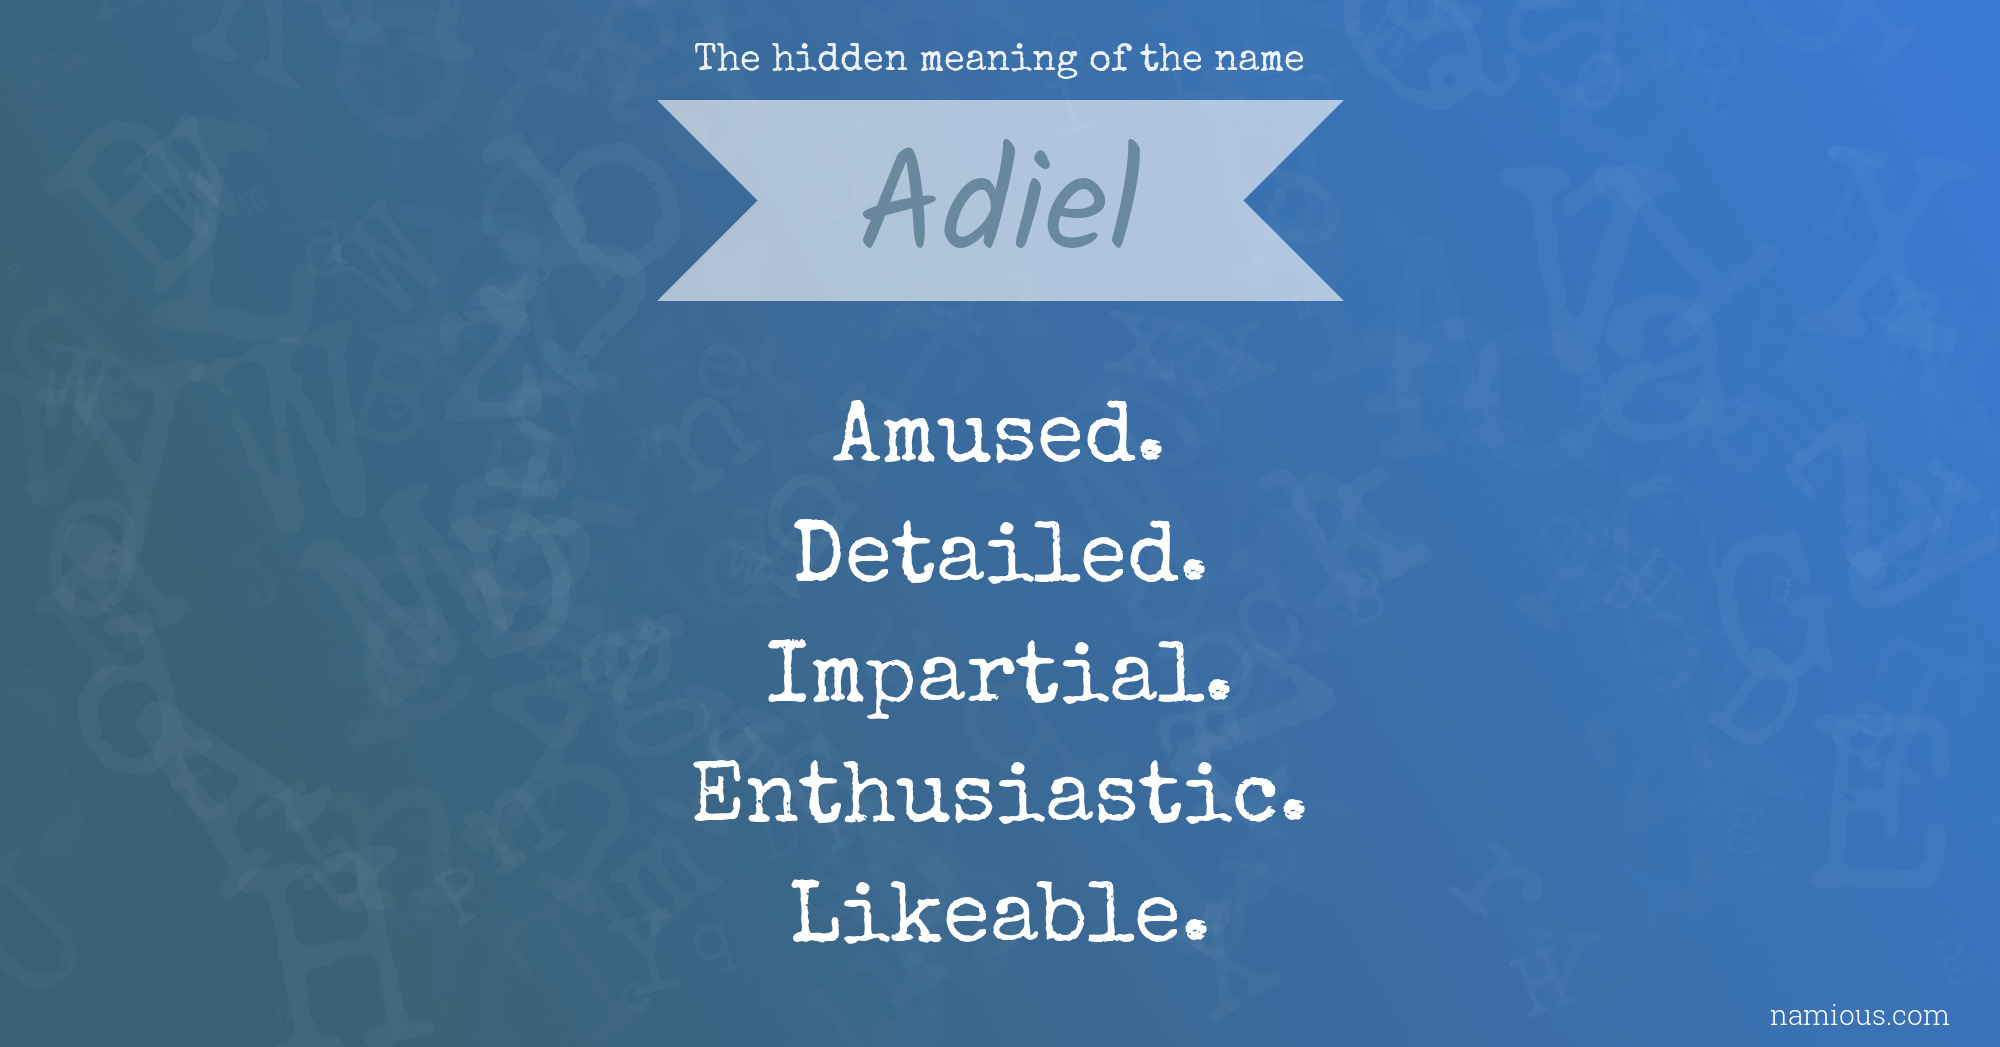 The Hidden Meaning Of The Name Adiel | Namious